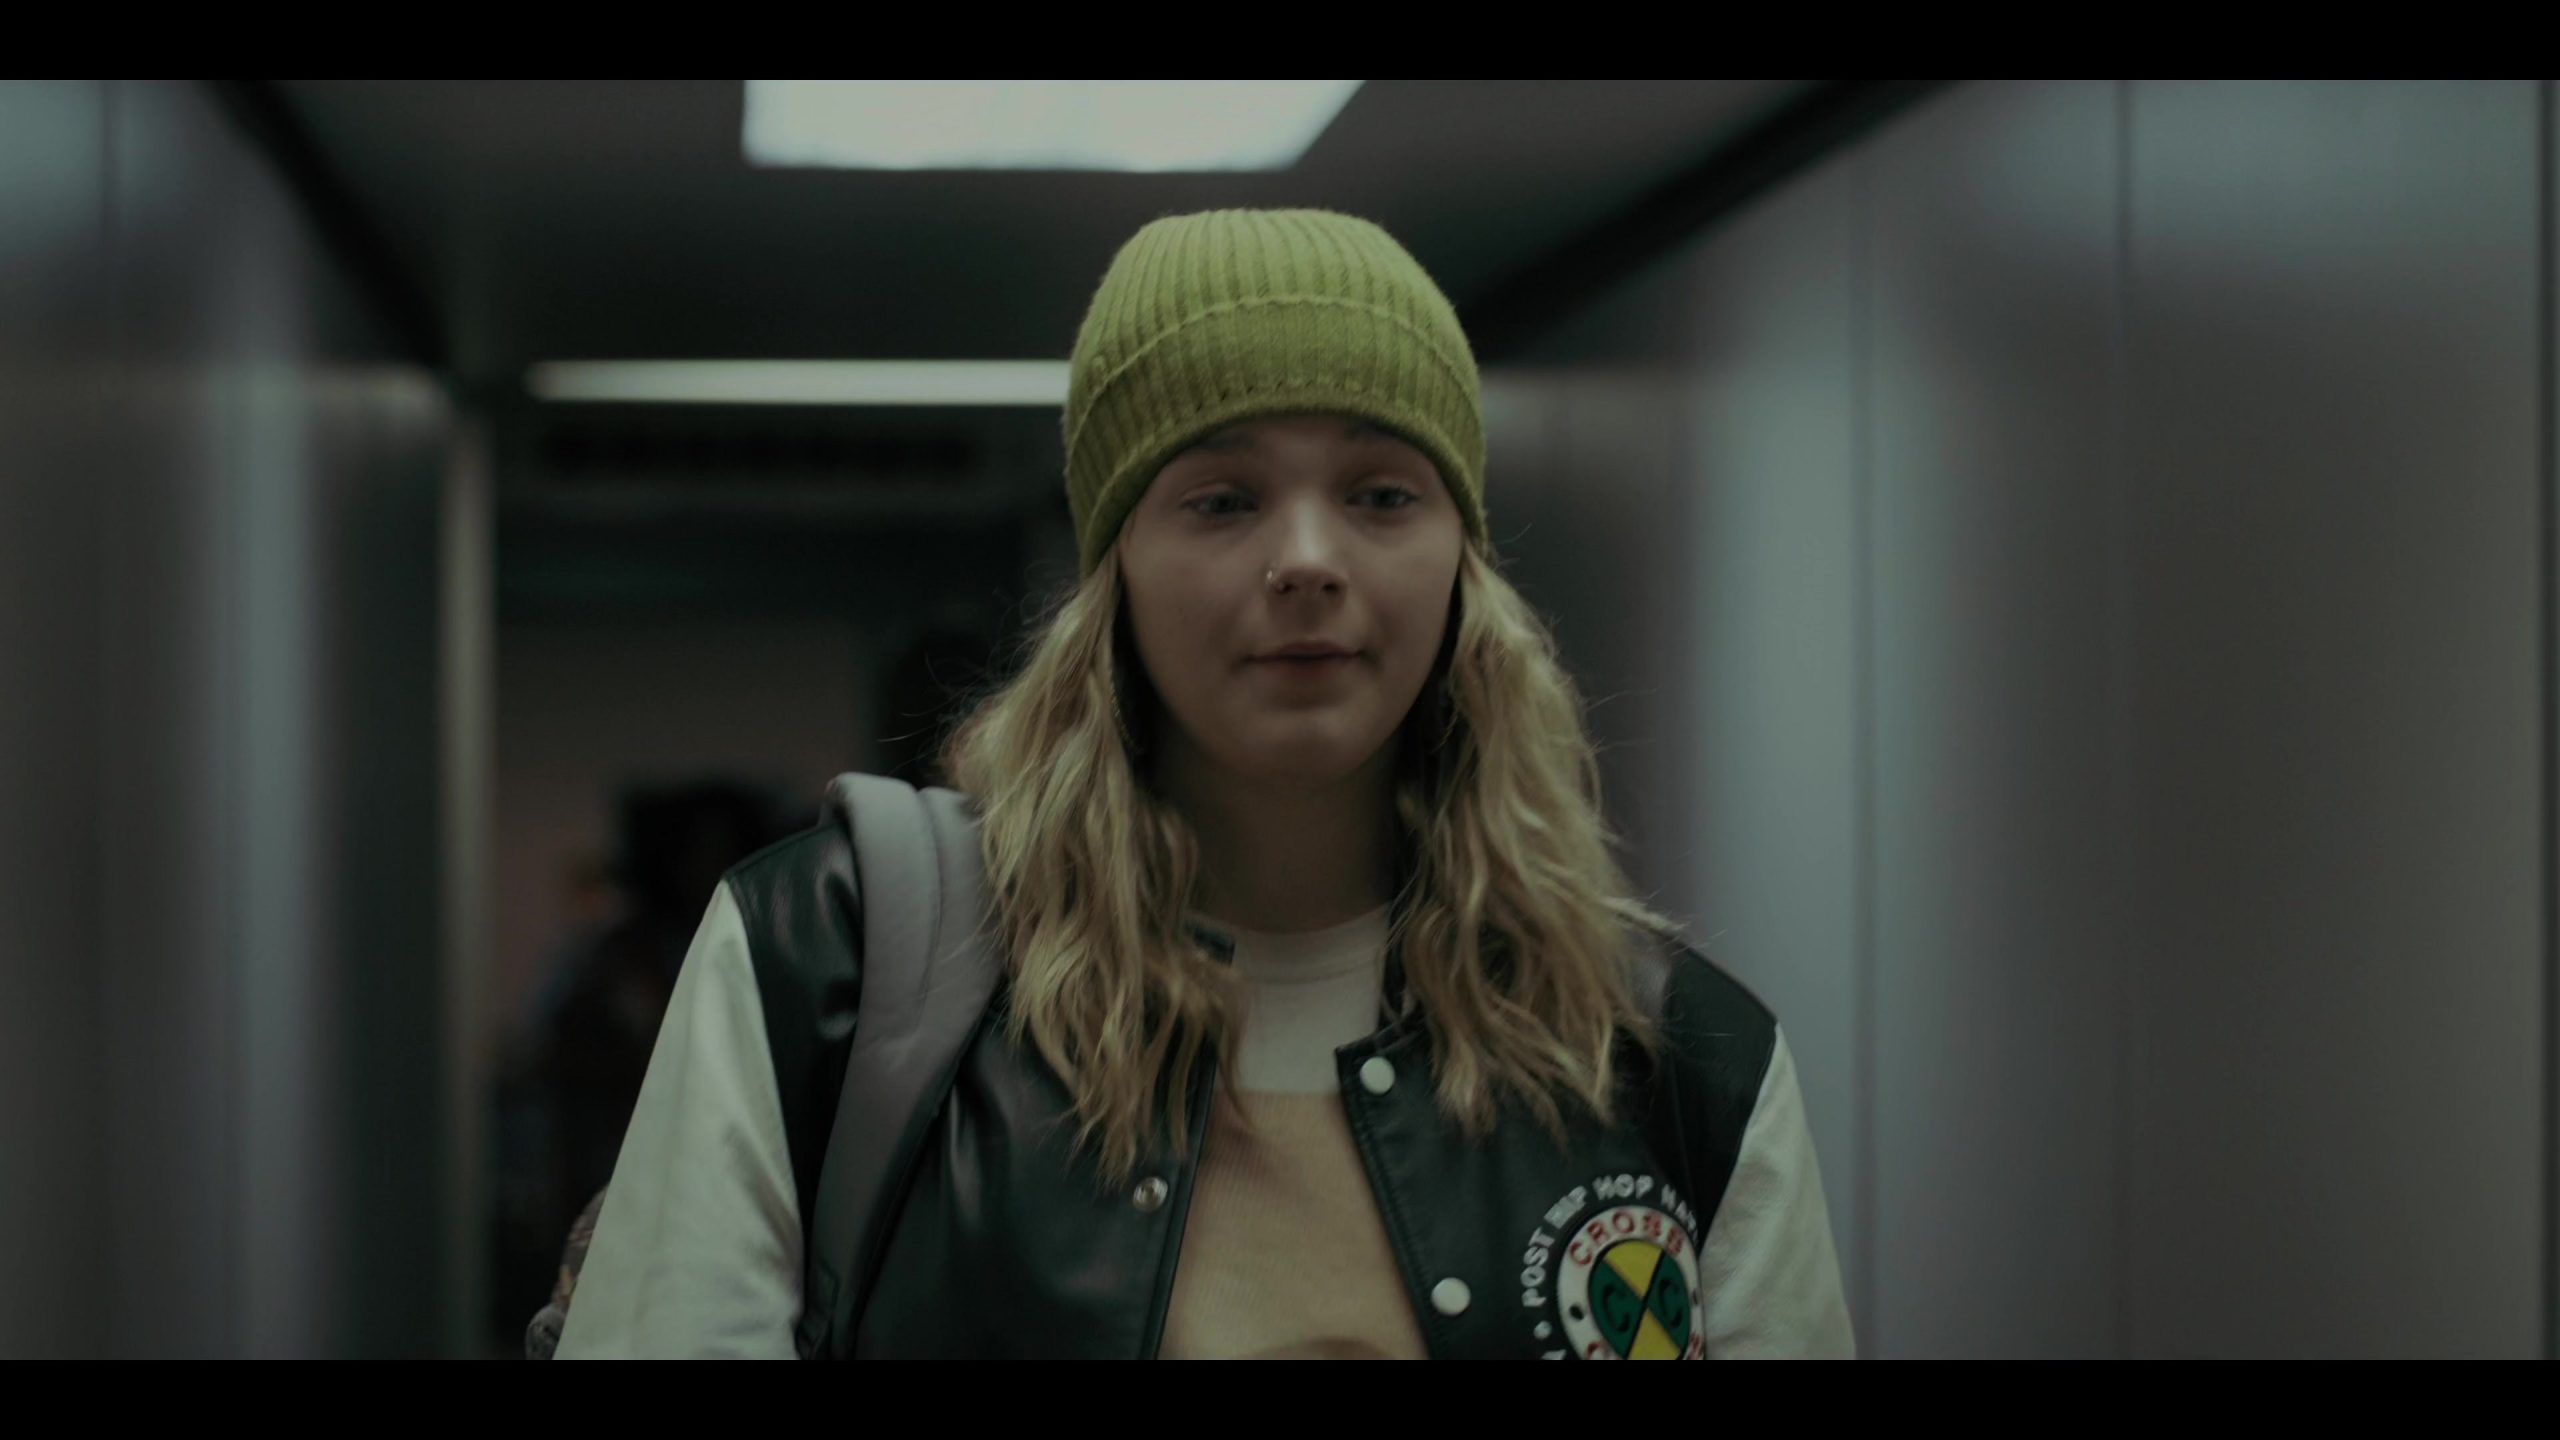 Worn on Justified: City Primeval TV Show - Green Beanie Hat of Vivian Olyphant as Willa Givens